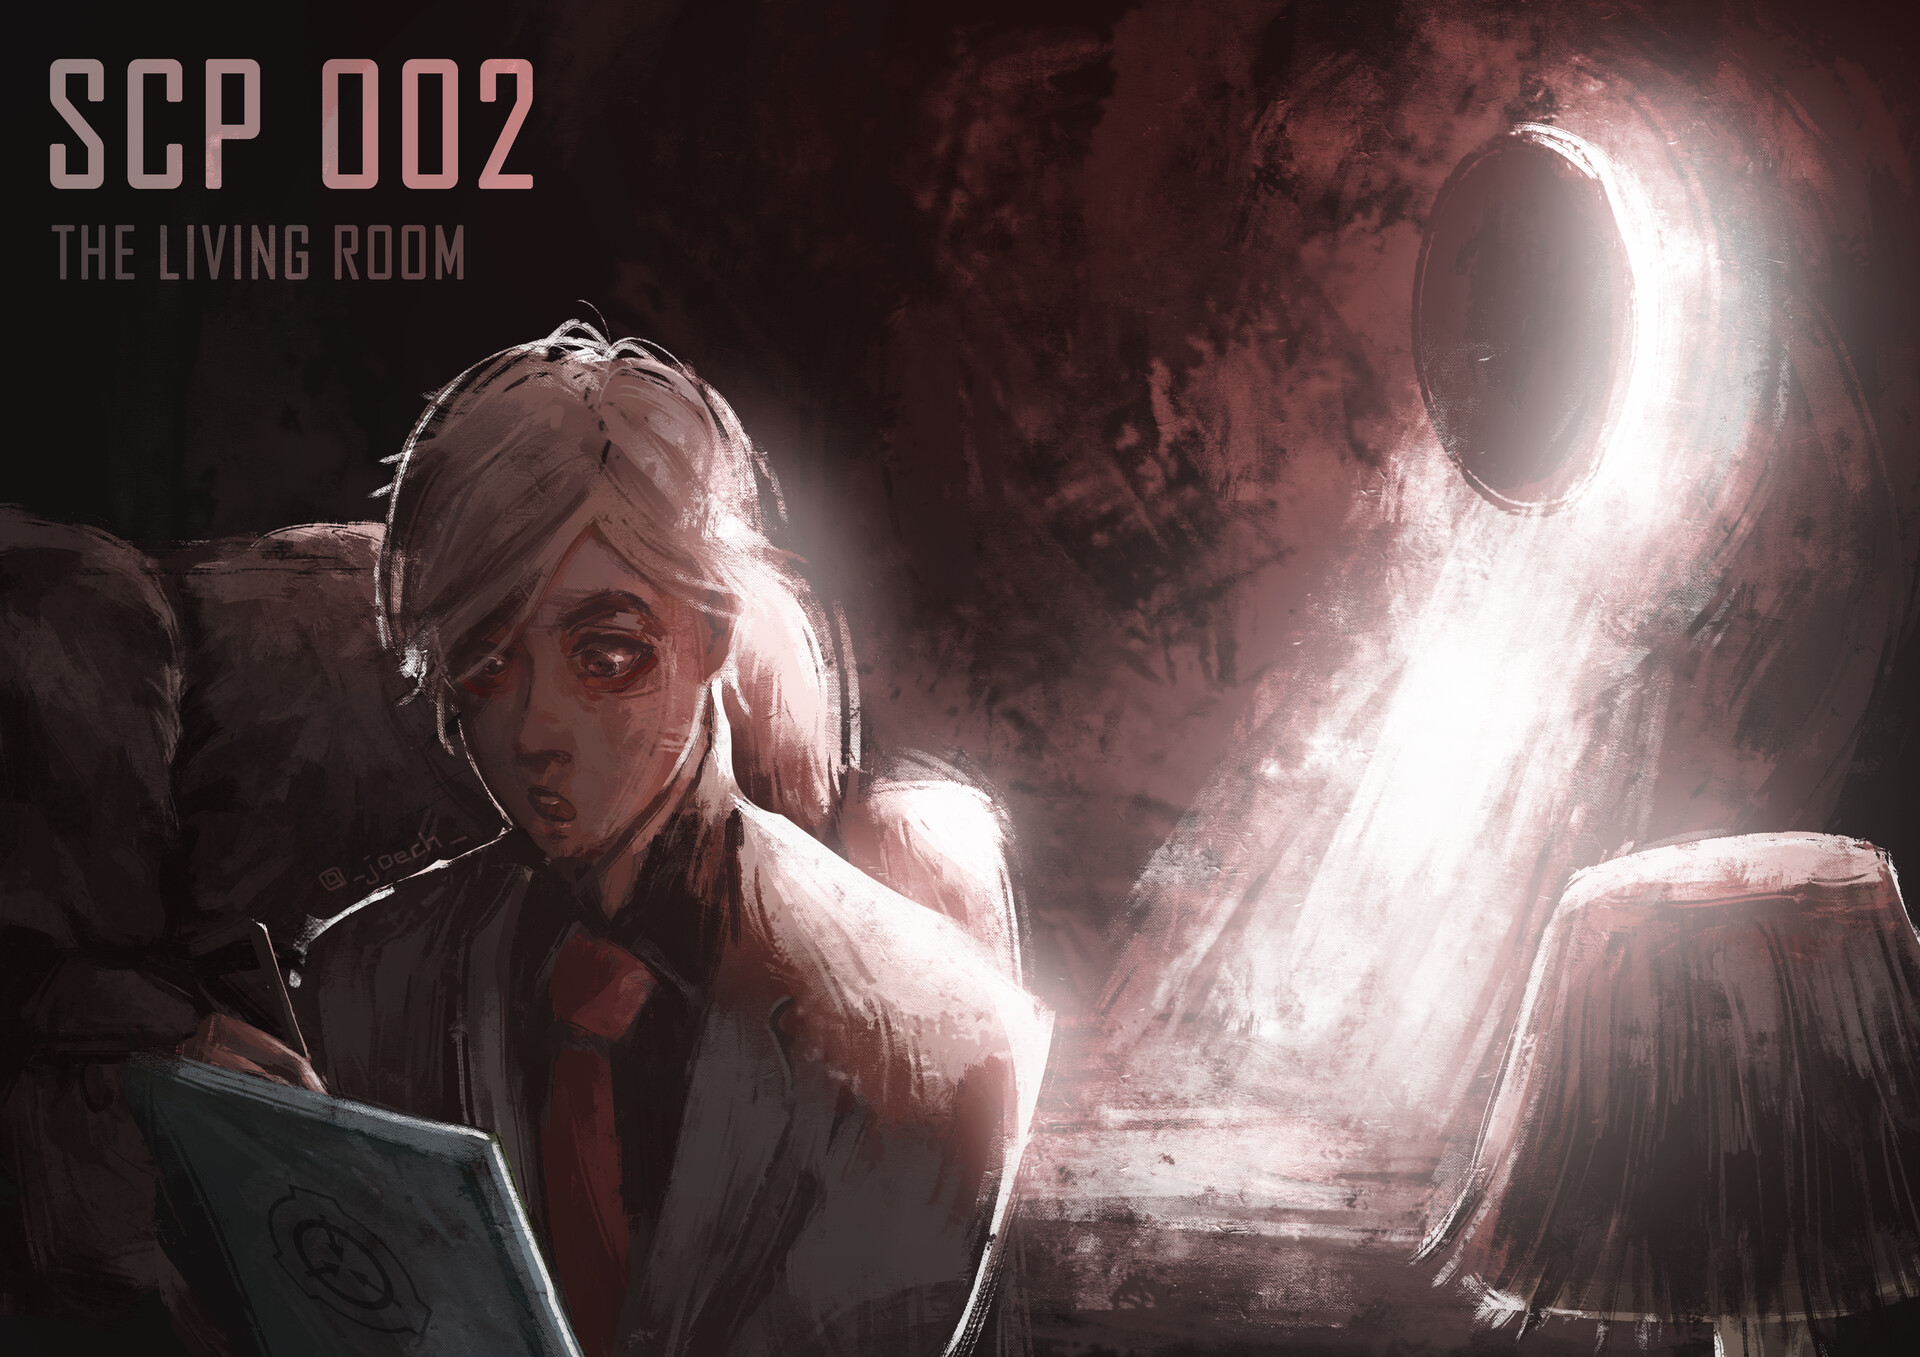 The Living Room, SCP-002 - The SCP Experience (podcast)